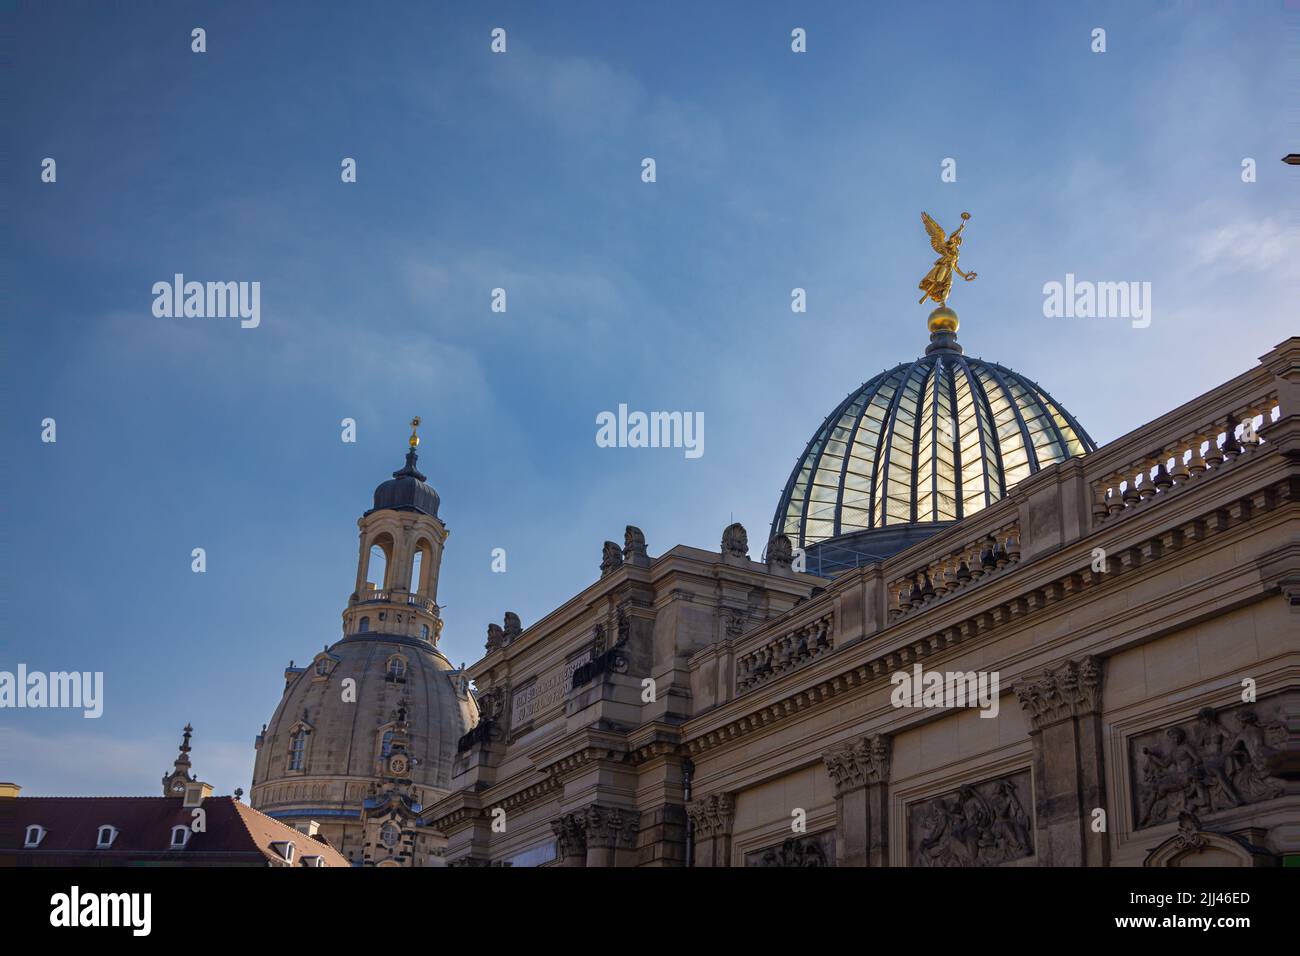 Dresden, Germany - June 28, 2022: At the Academy of Arts on the River Elbe Terraces. Golden statue on the glass dome of the historical building. Landm Stock Photo